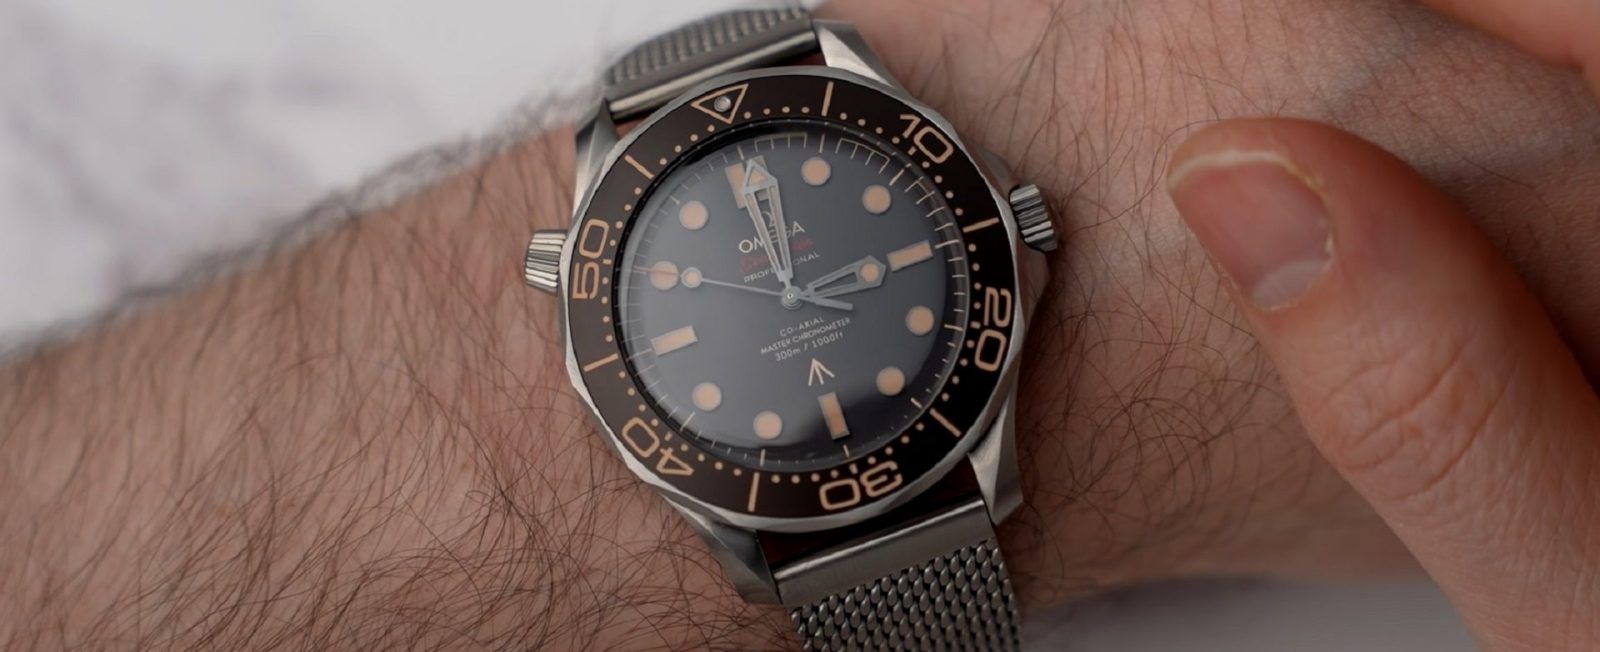 Watch YouTubers elevate the art of selling luxury timepieces